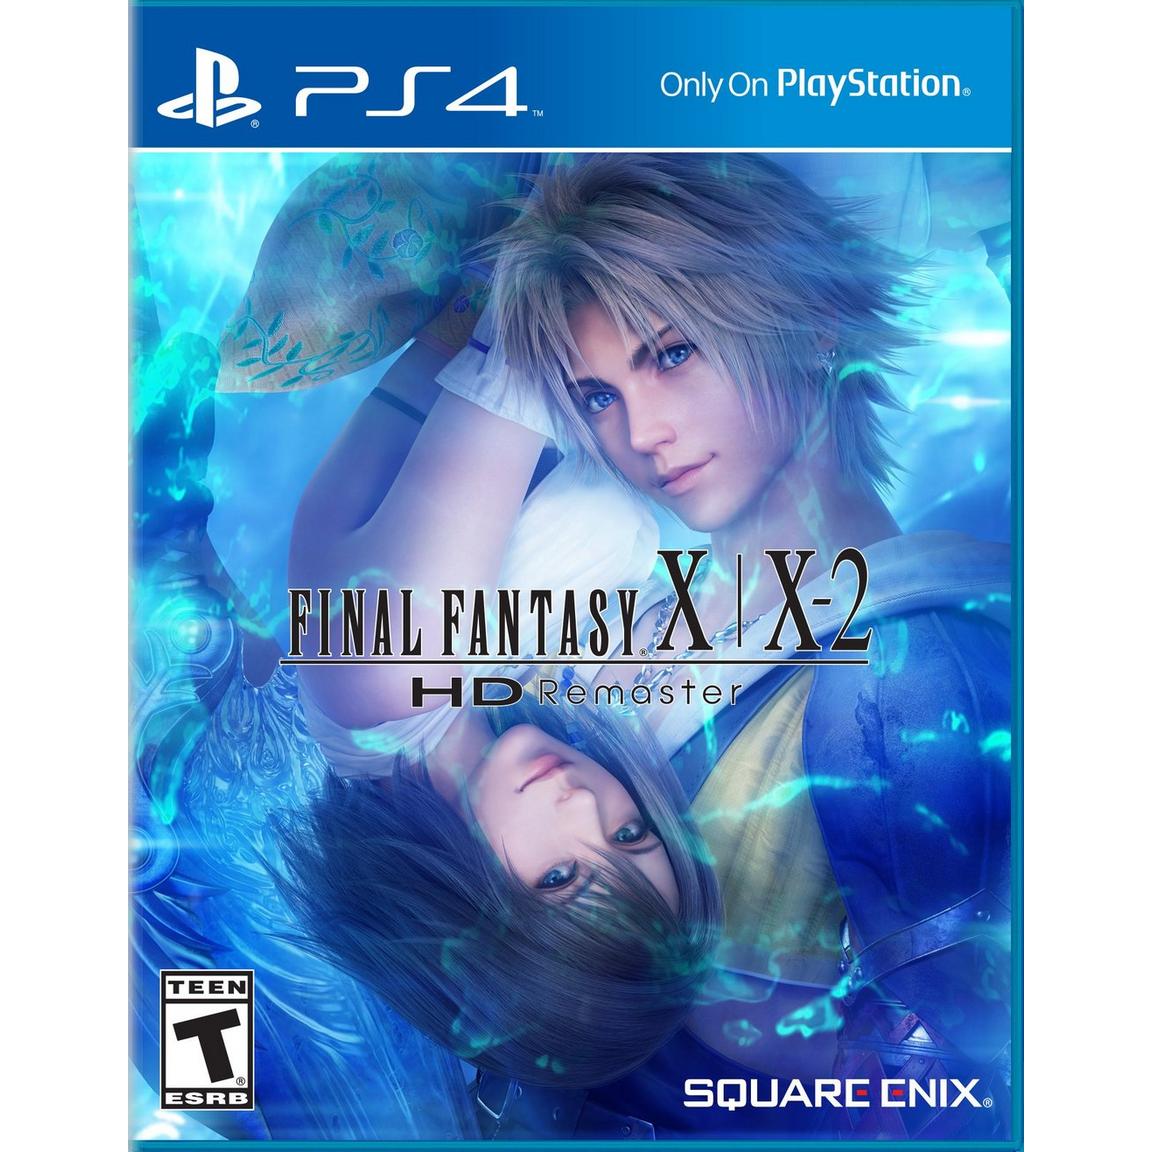 Final Fantasy X-X2 HD Remaster - PlayStation 4, Pre-Owned -  Square Enix